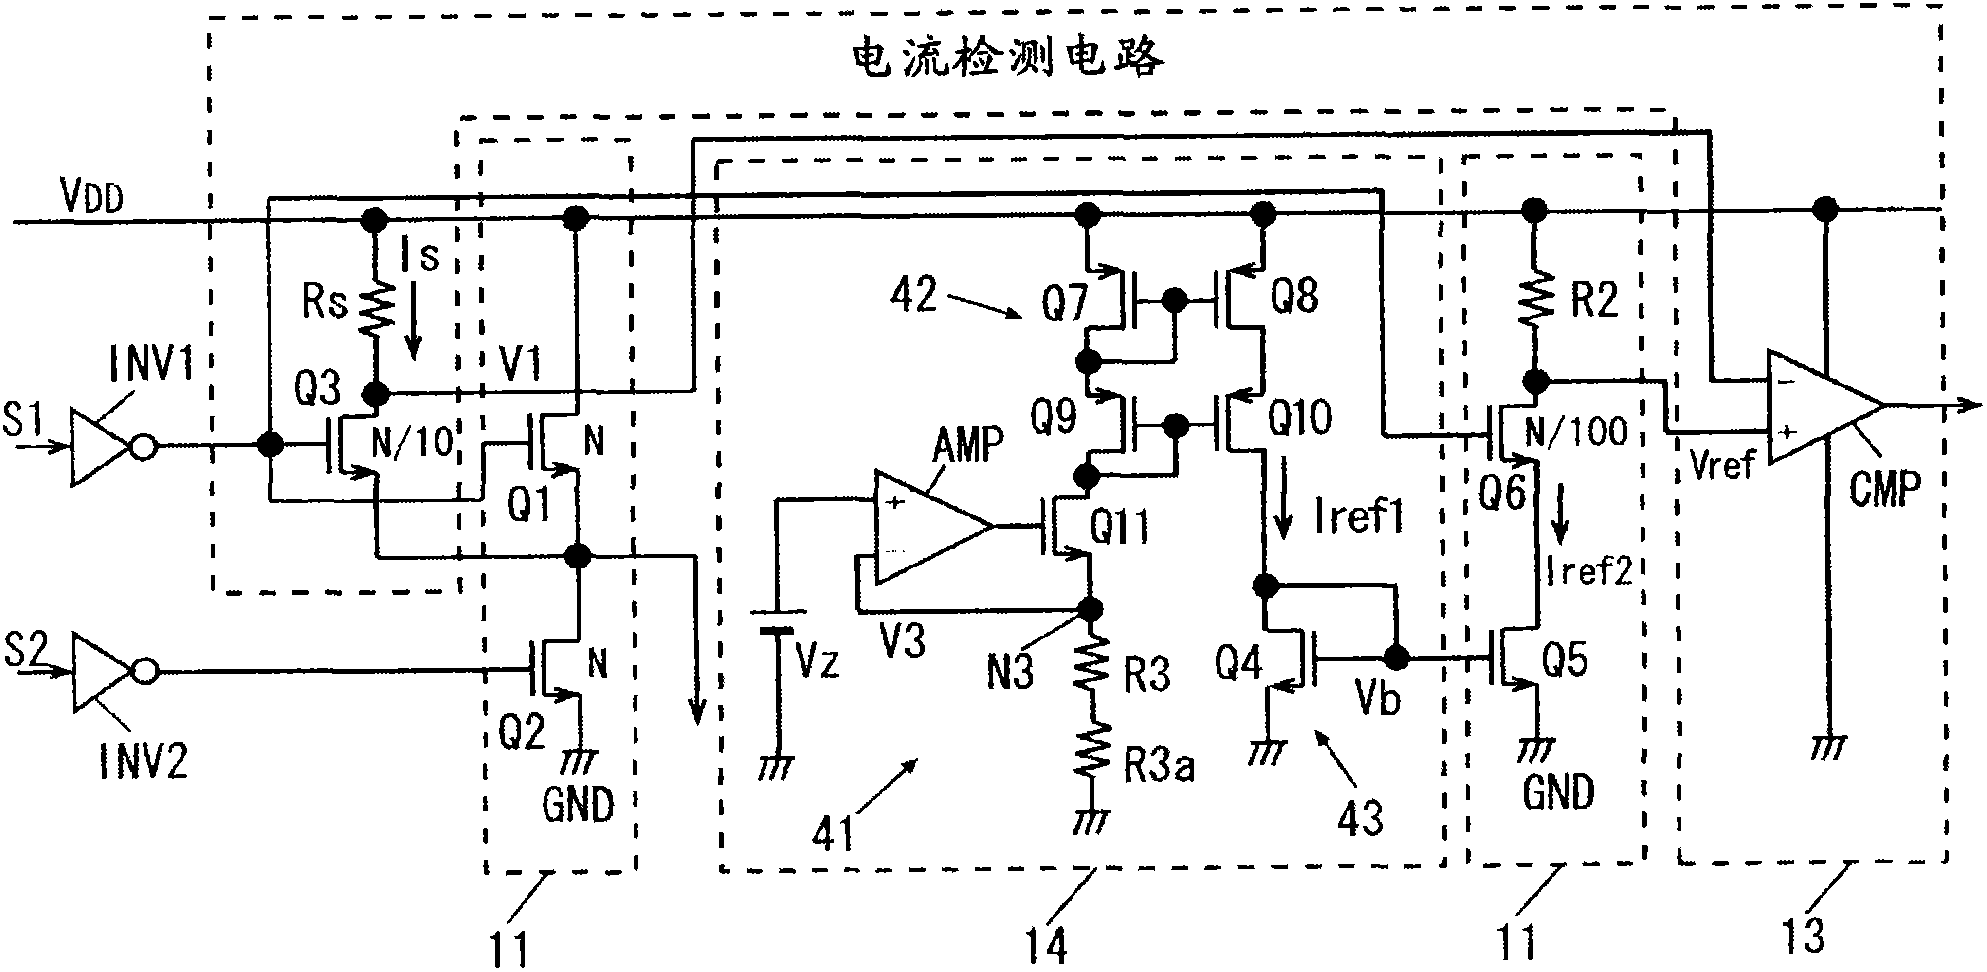 Output current detecting circuit and transmission circuit